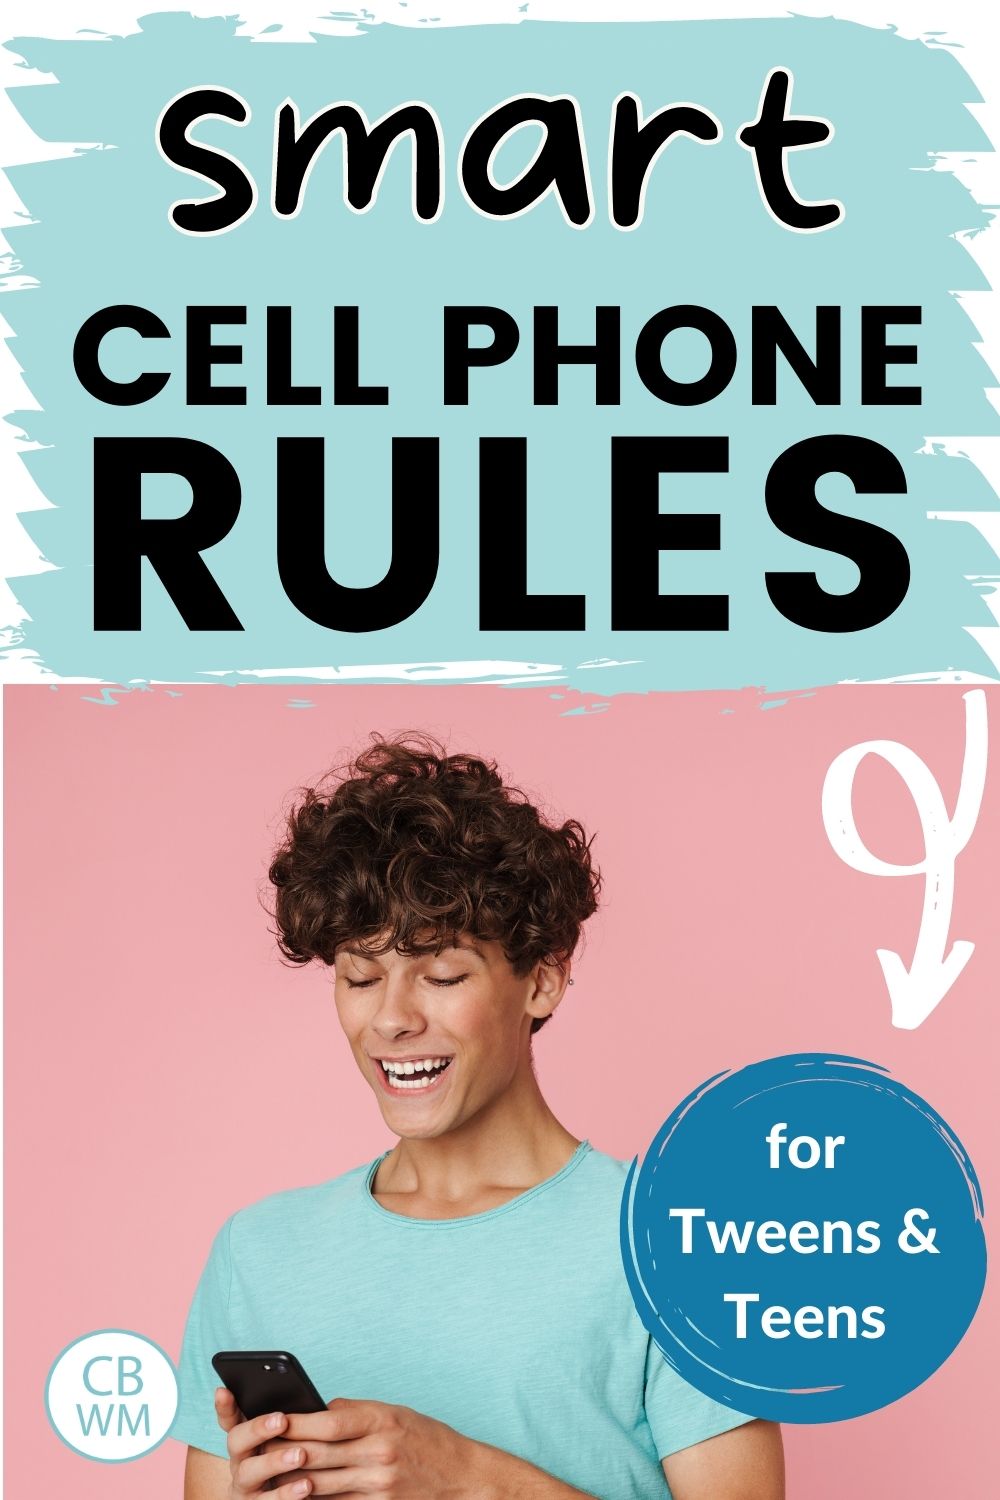 smart cell phone rules for teens and tweens pinnable image